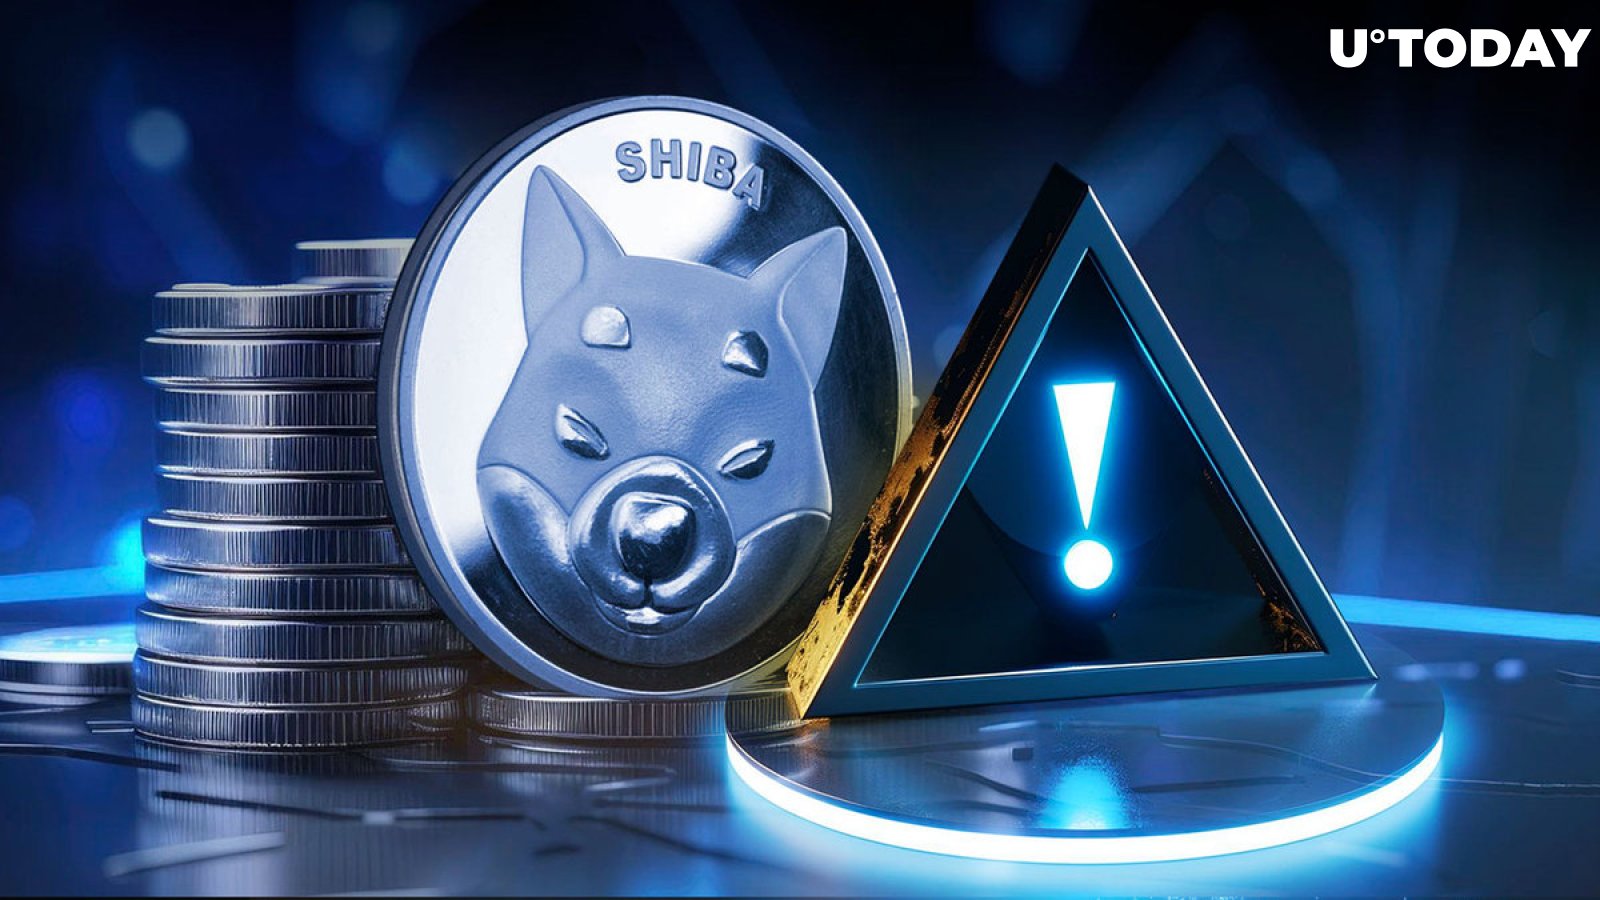 The SHIB team reaches out to the community with an important message that has spanned centuries